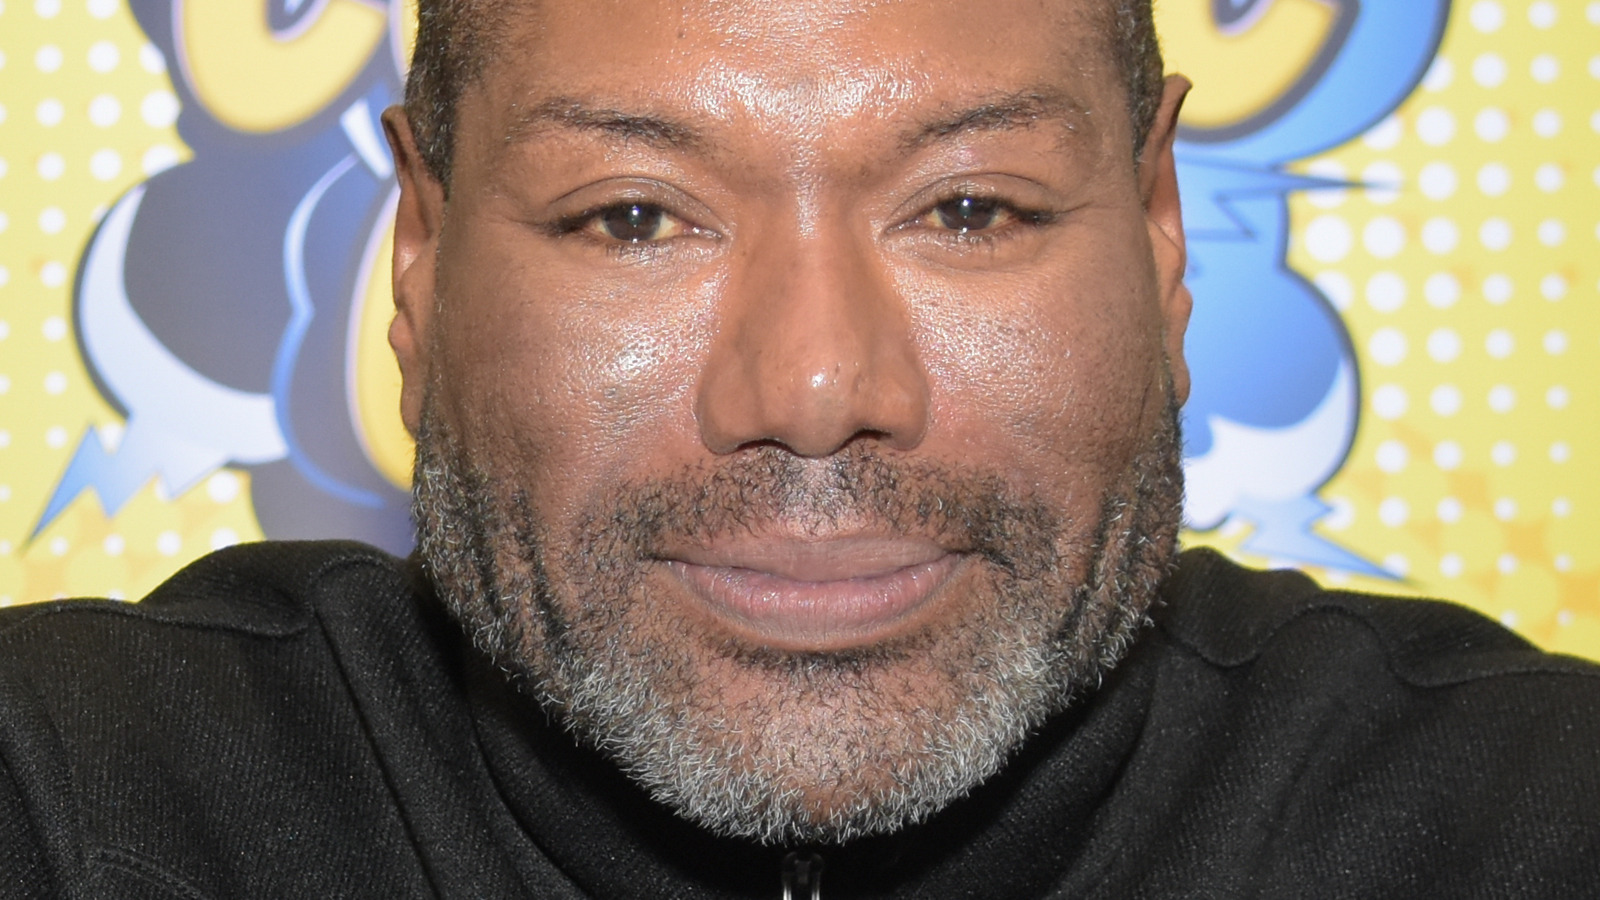 CHRISTOPHER JUDGE - Teal'c (Indeed)  Science fiction tv shows, Actors,  Stargate